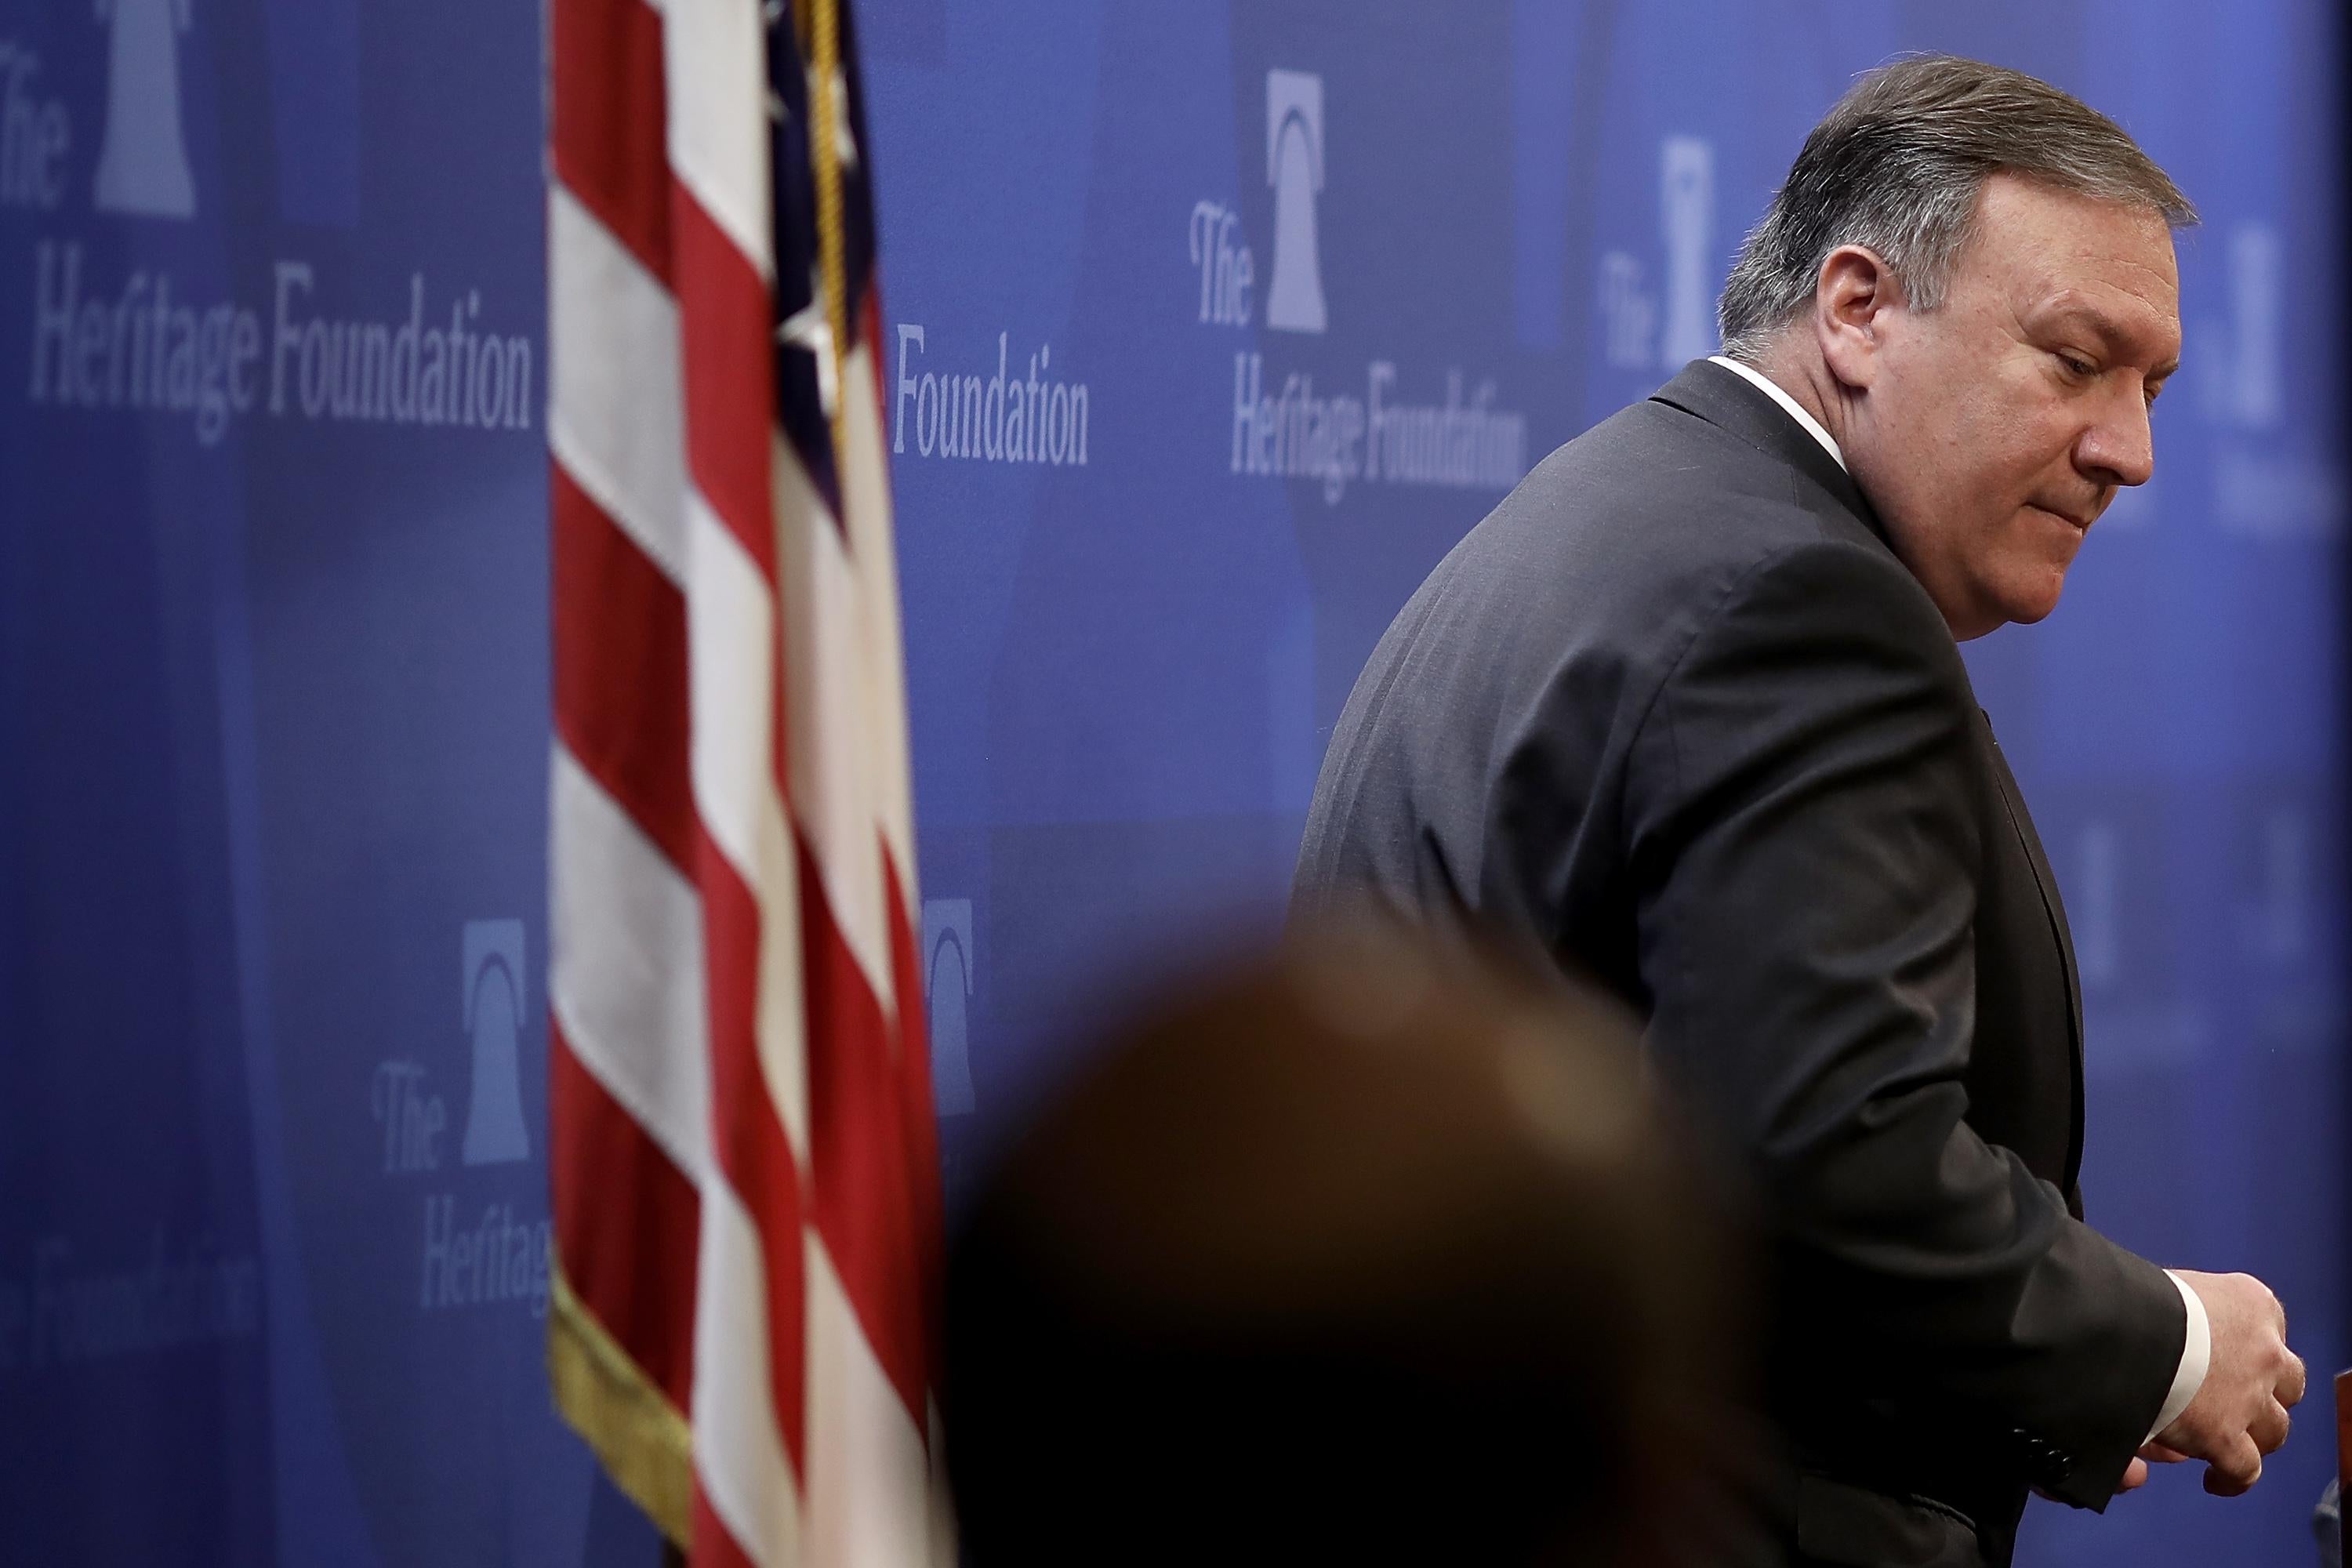 WASHINGTON, DC - MAY 21:  U.S. Secretary of State Mike Pompeo concludes his remarks at the Heritage Foundation May 21, 2018 in Washington, DC. Pompeo spoke on the topic of 'After the Deal: A New Iran Strategy.'  (Photo by Win McNamee/Getty Images)